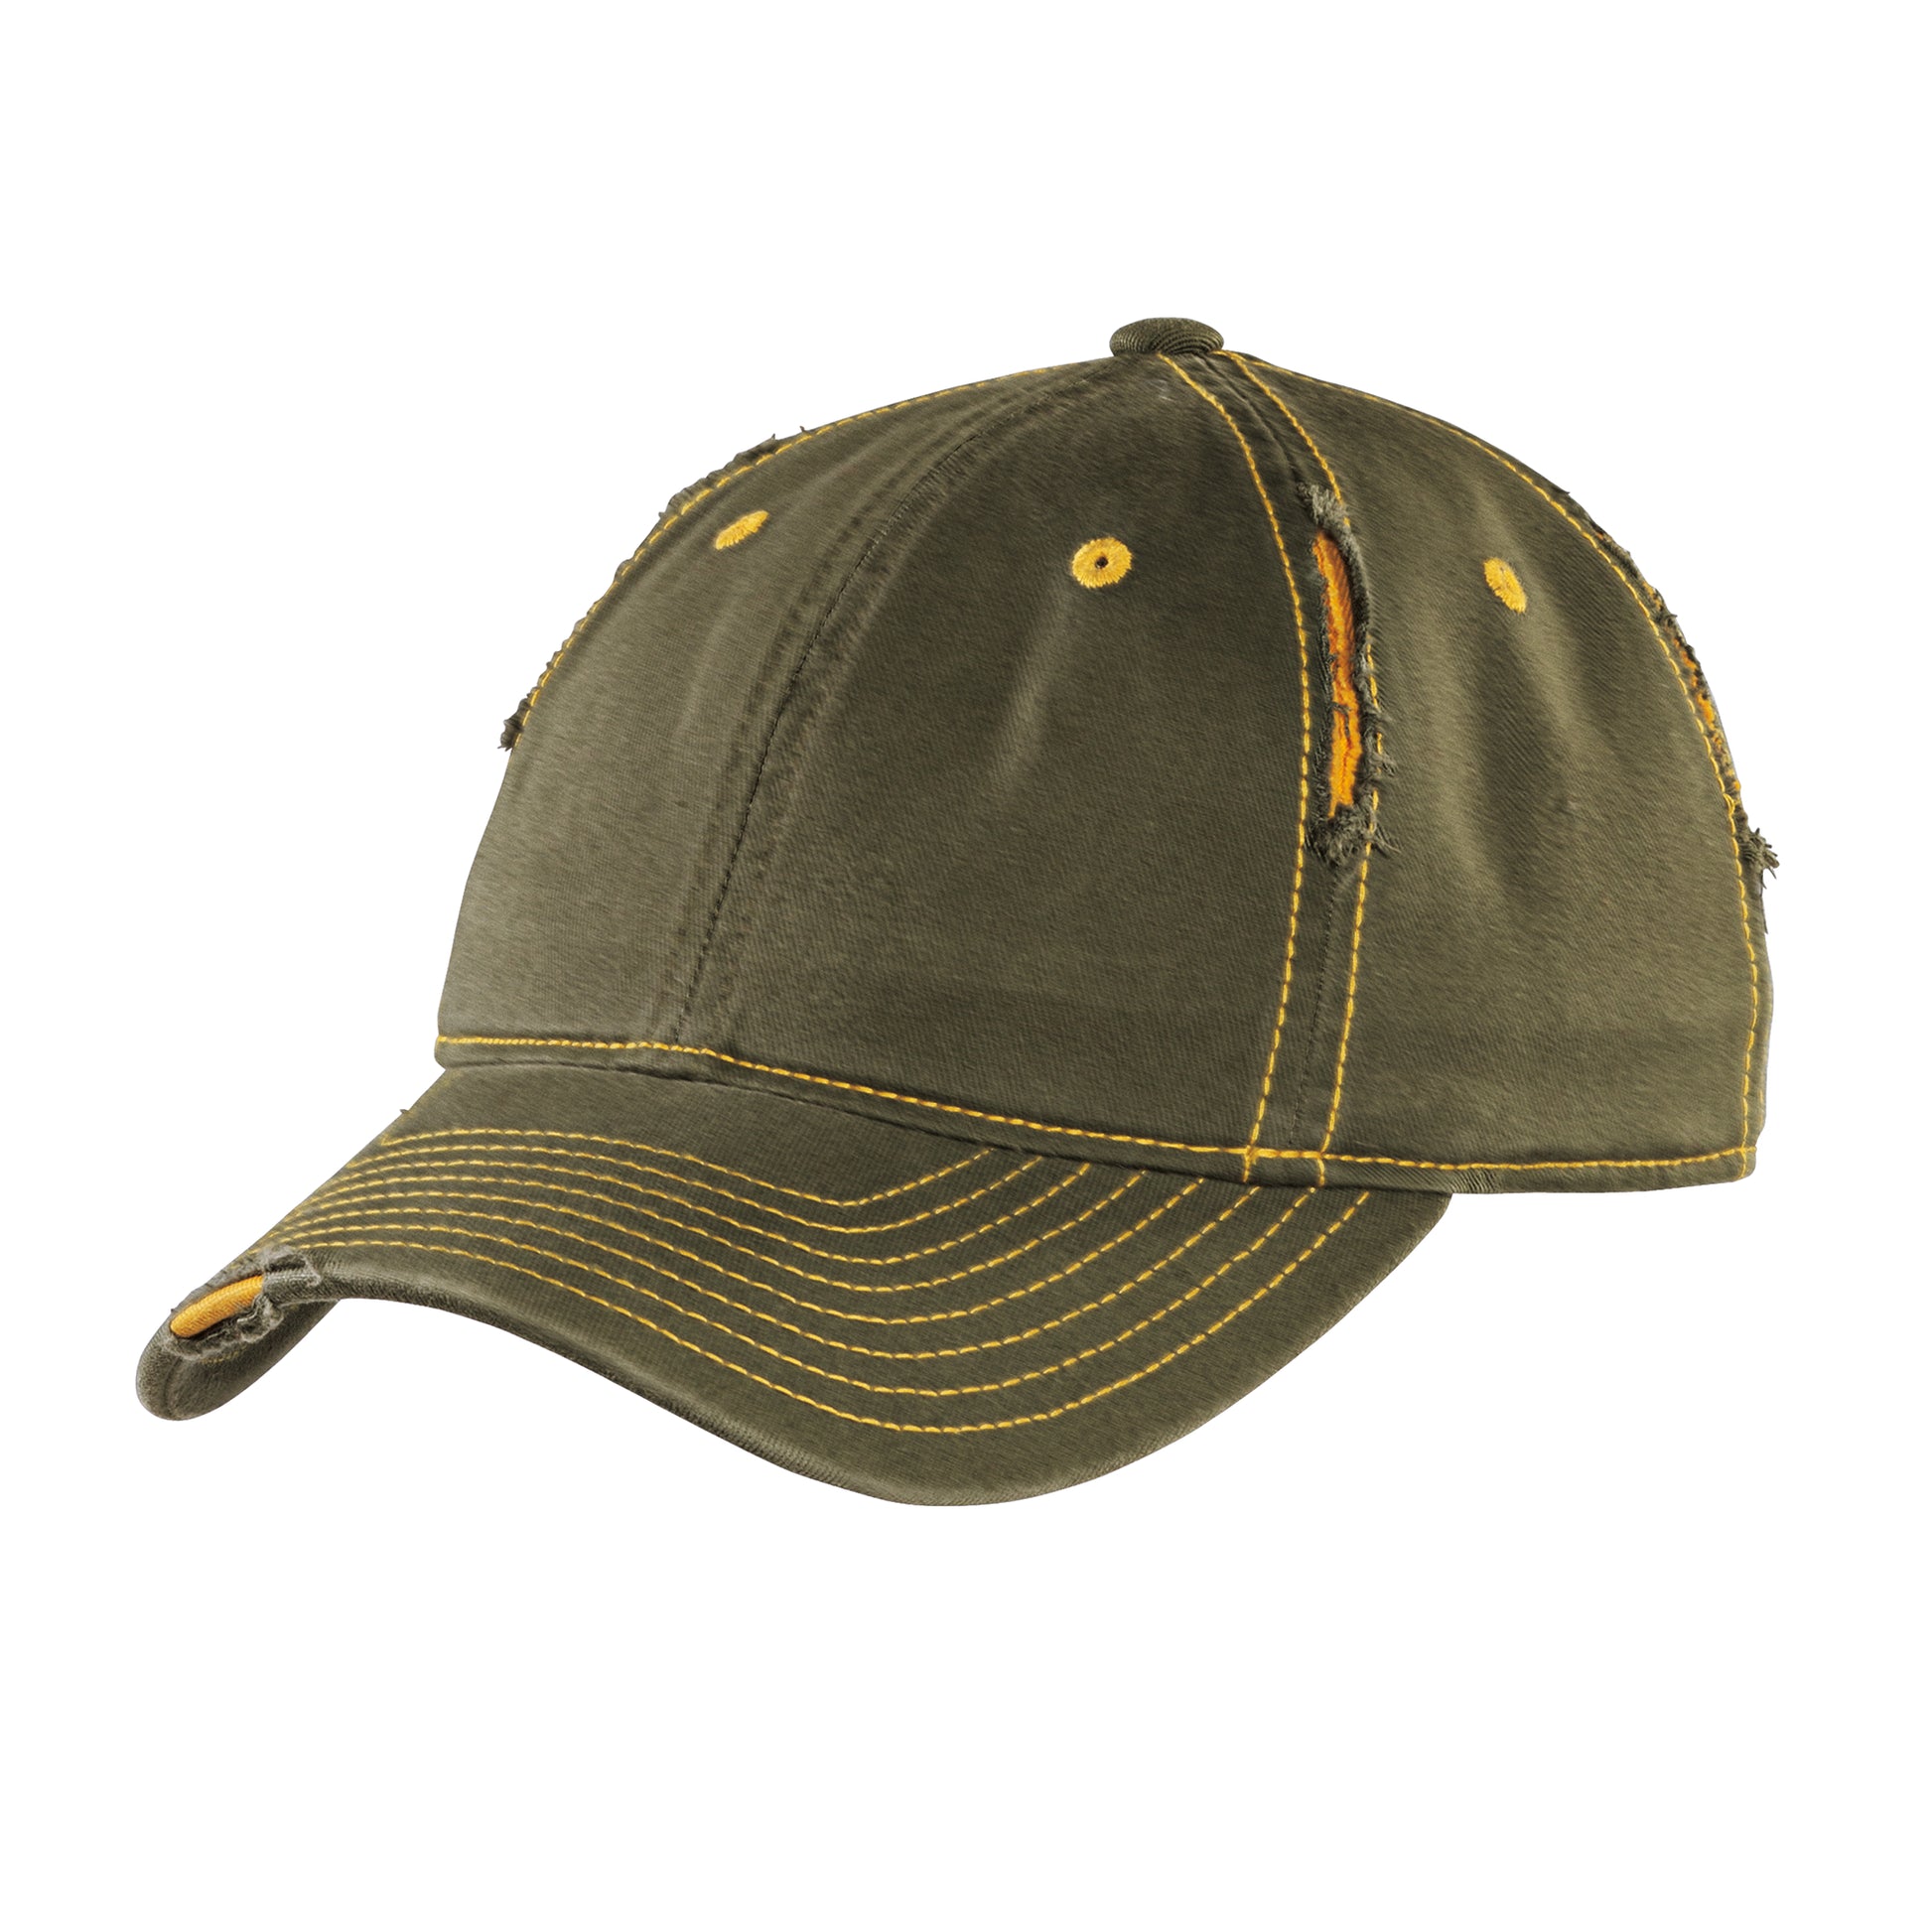 district rip & distressed cap army gold